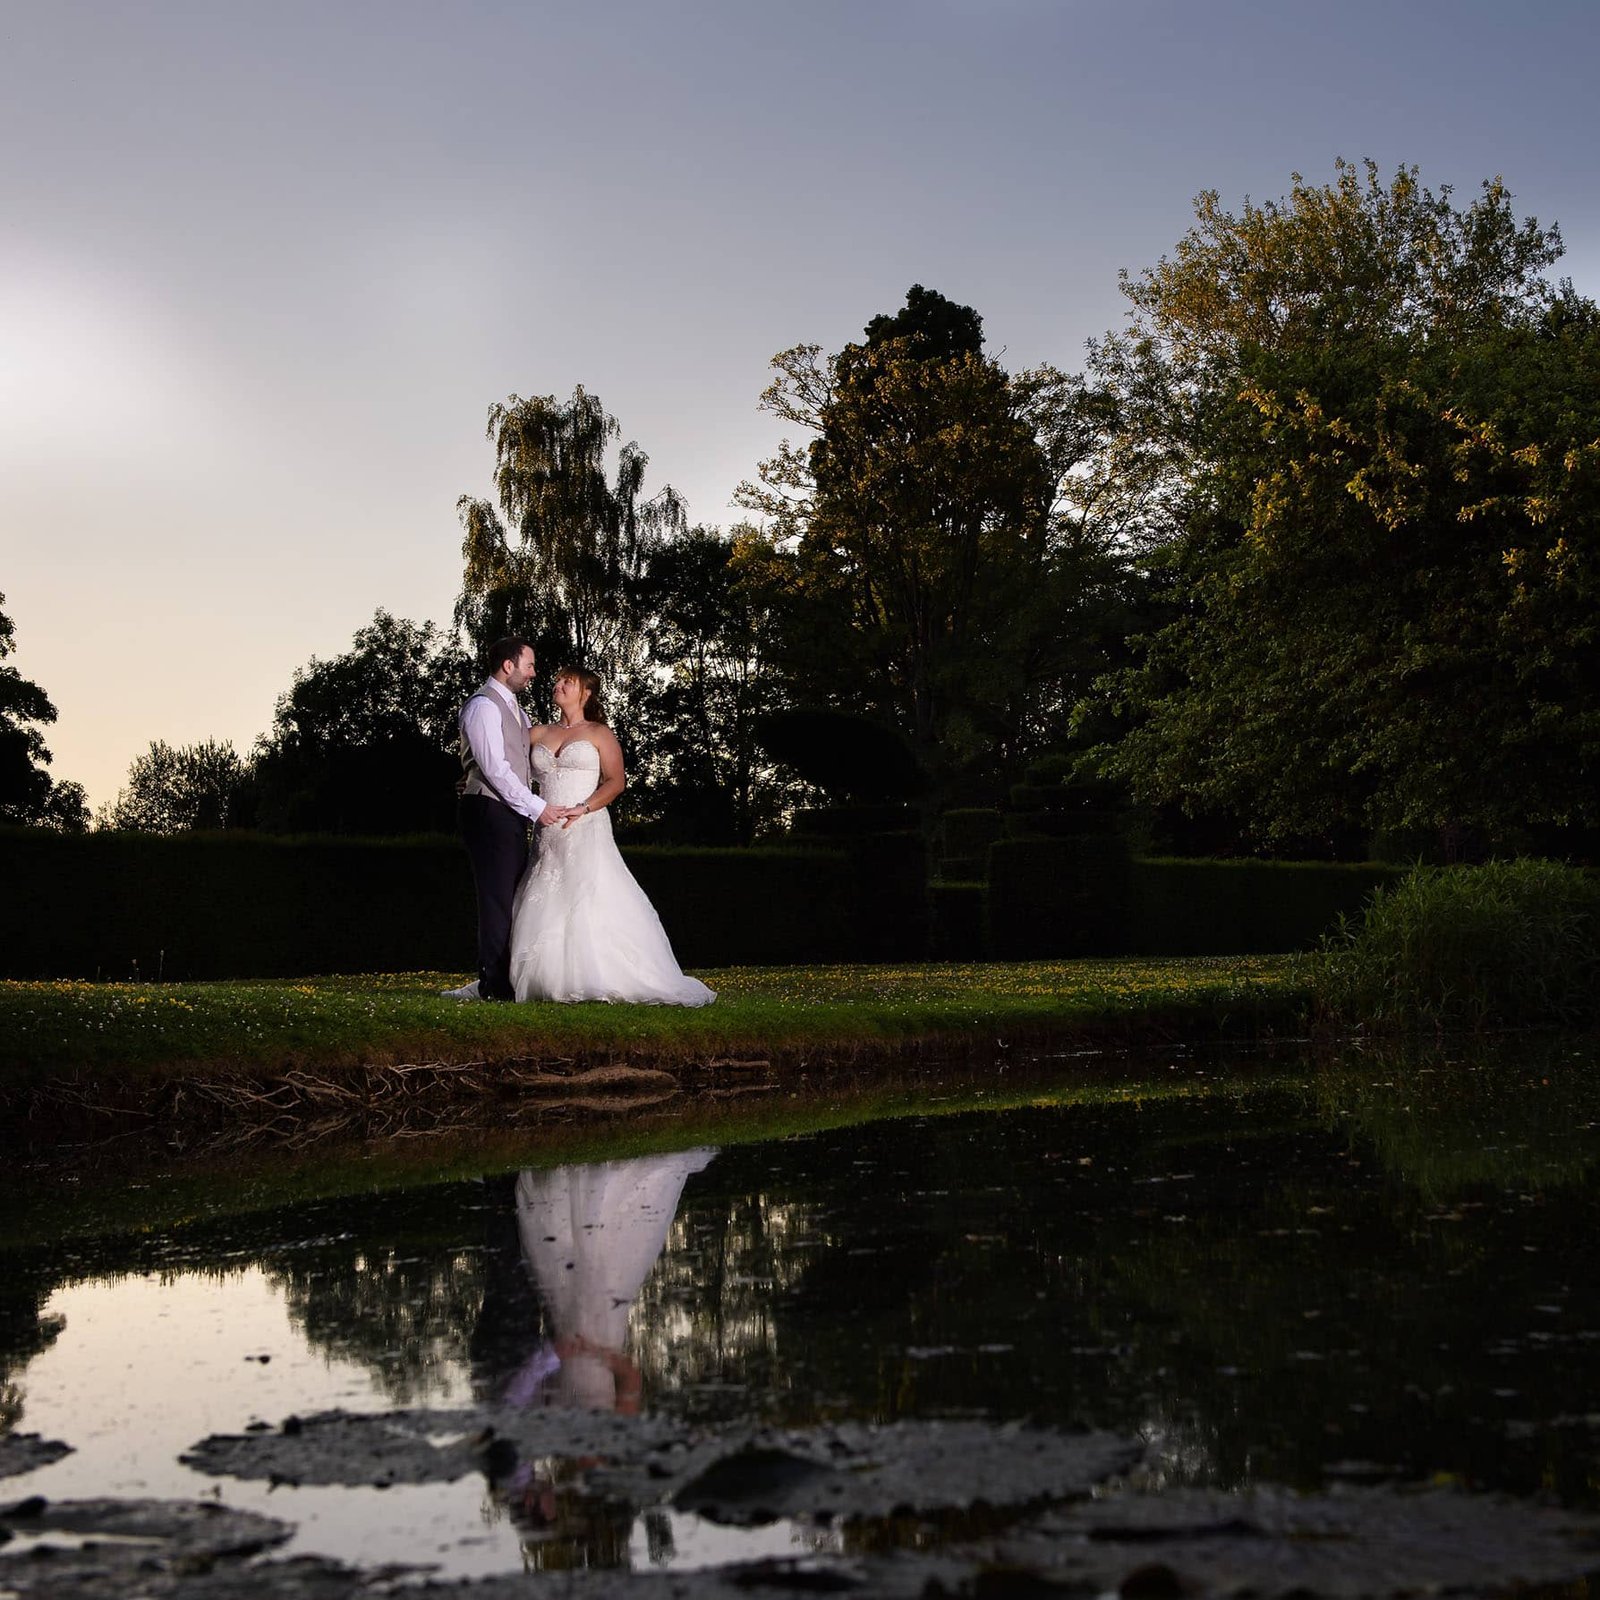 Newly wed couple reflection in water